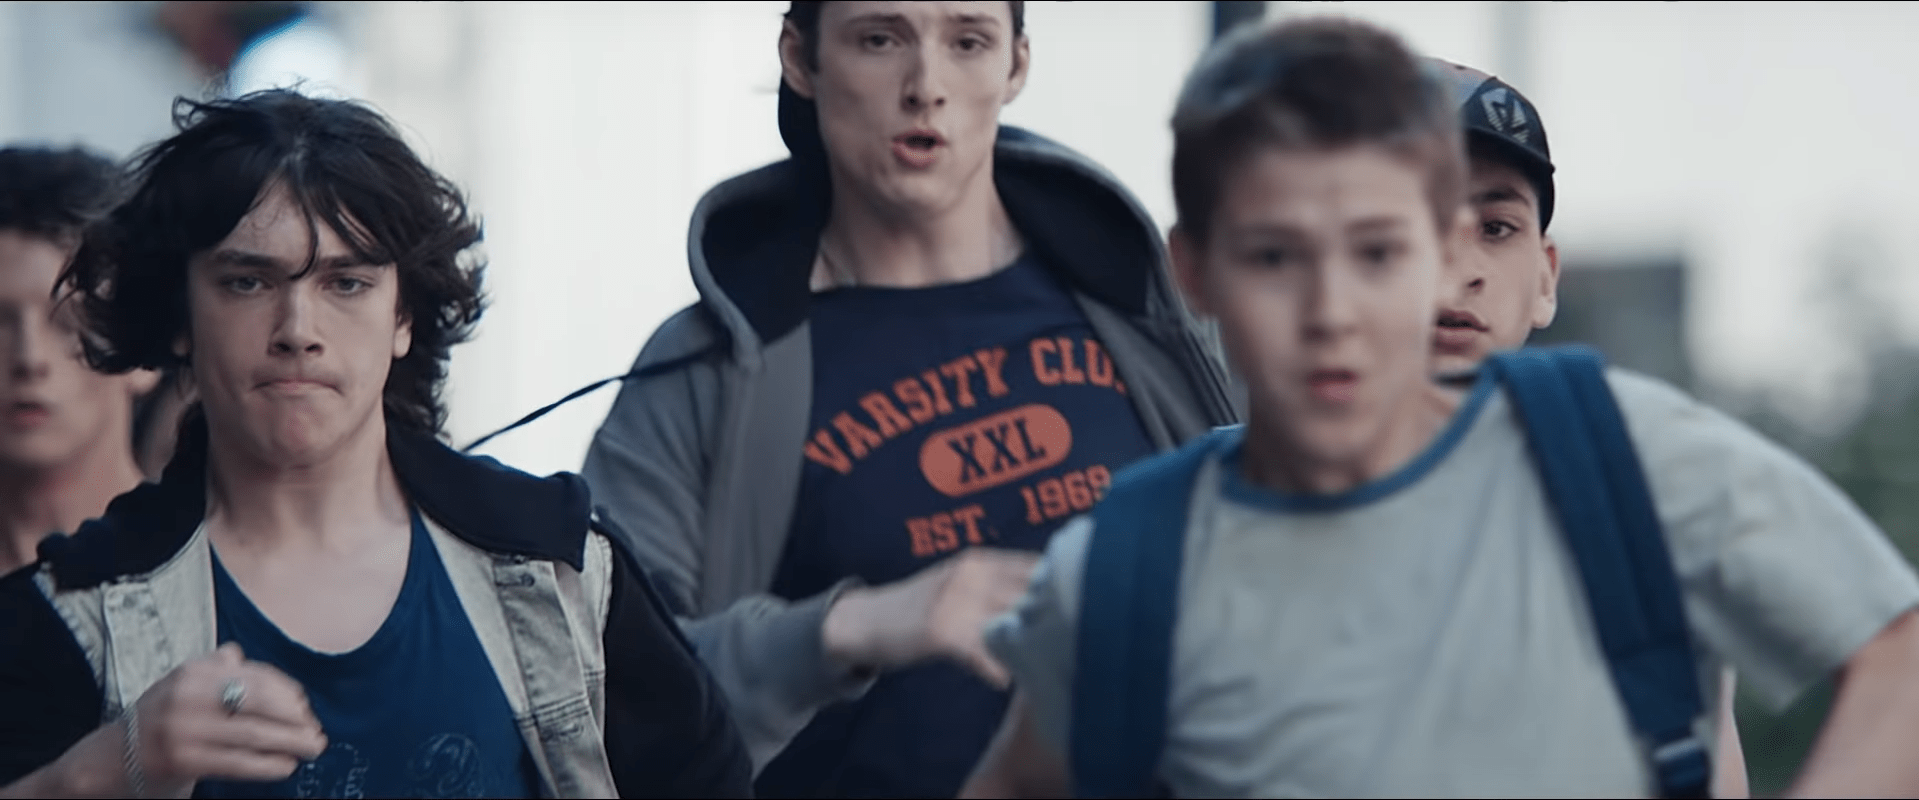 Why has the Gillette ad received such a bad reaction?